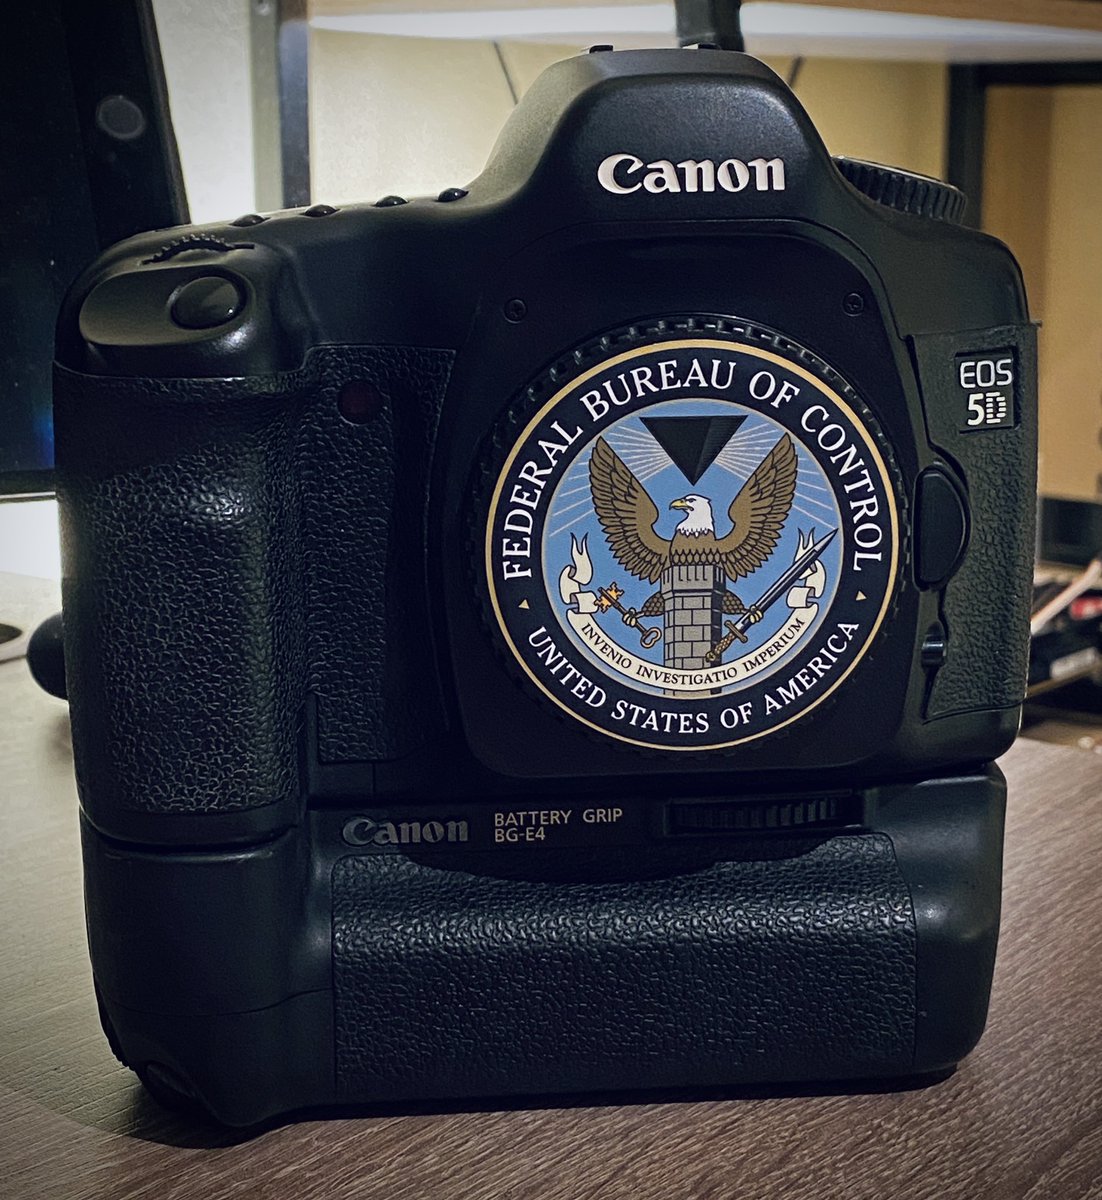 Found an old #ControlRemedy sticker and used it on my non-branded Canon body cap. Now it belongs to the Federal Bureau of Control! #Controlgame #Canon5D #DSLR